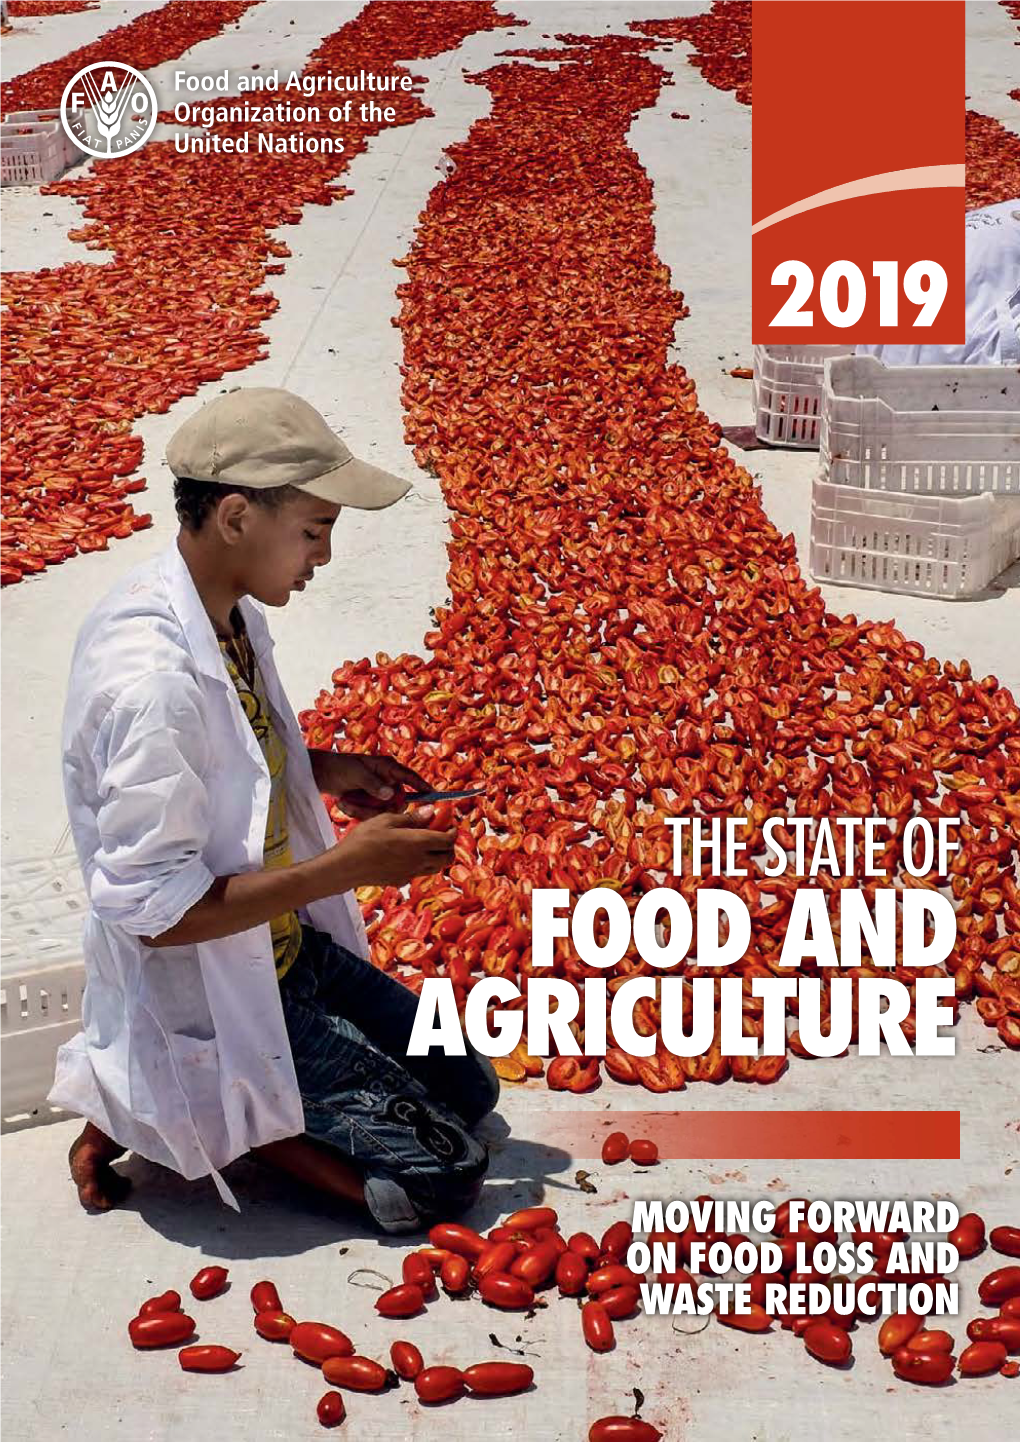 The State of Food and Agriculture 2019